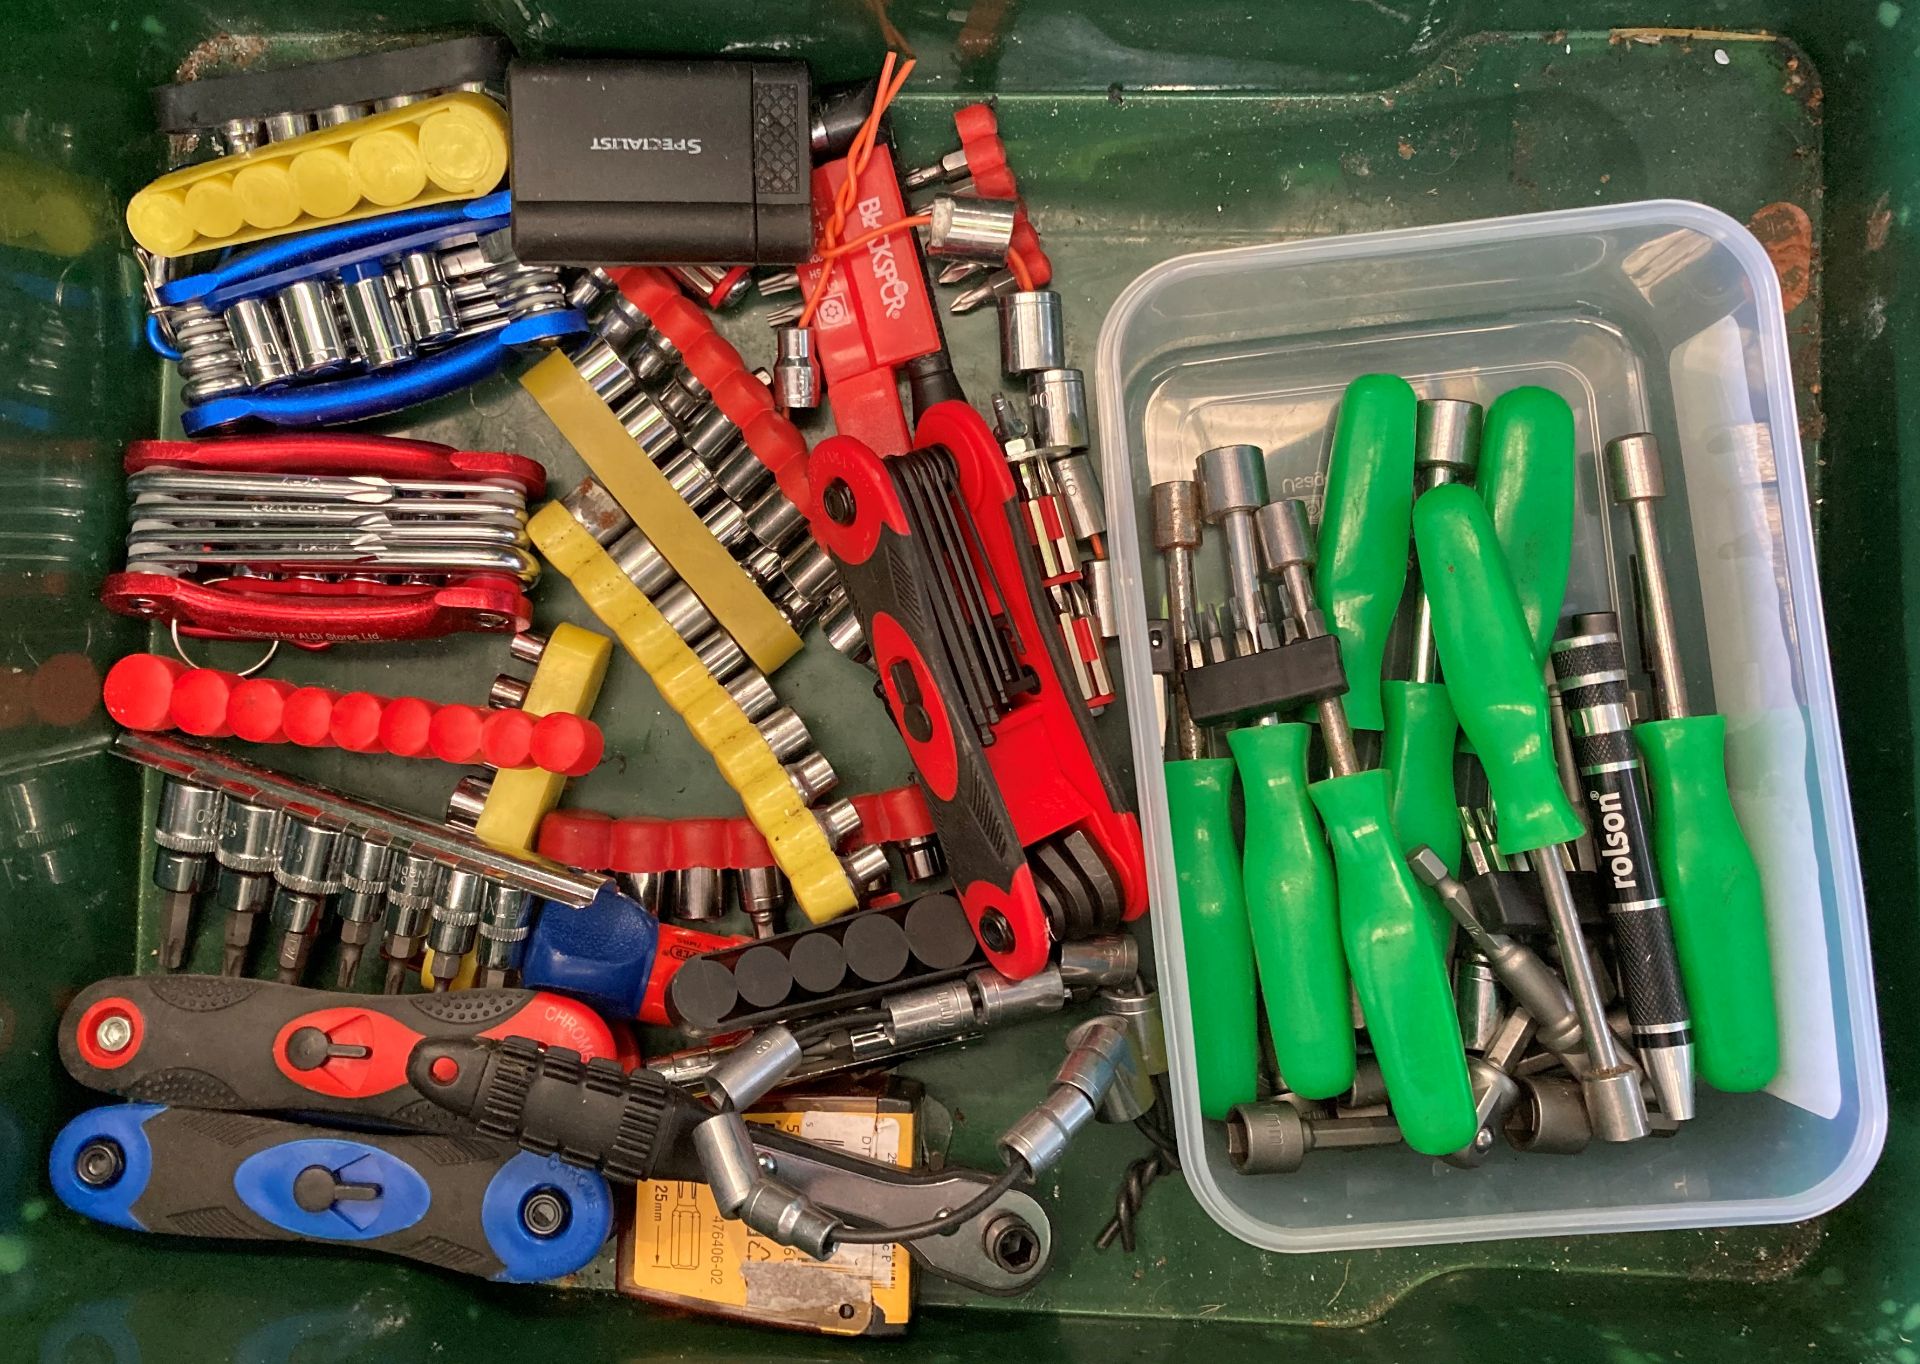 Contents to box - forty assorted interchangeable screwdrivers, ratchet screw drivers, - Image 2 of 2